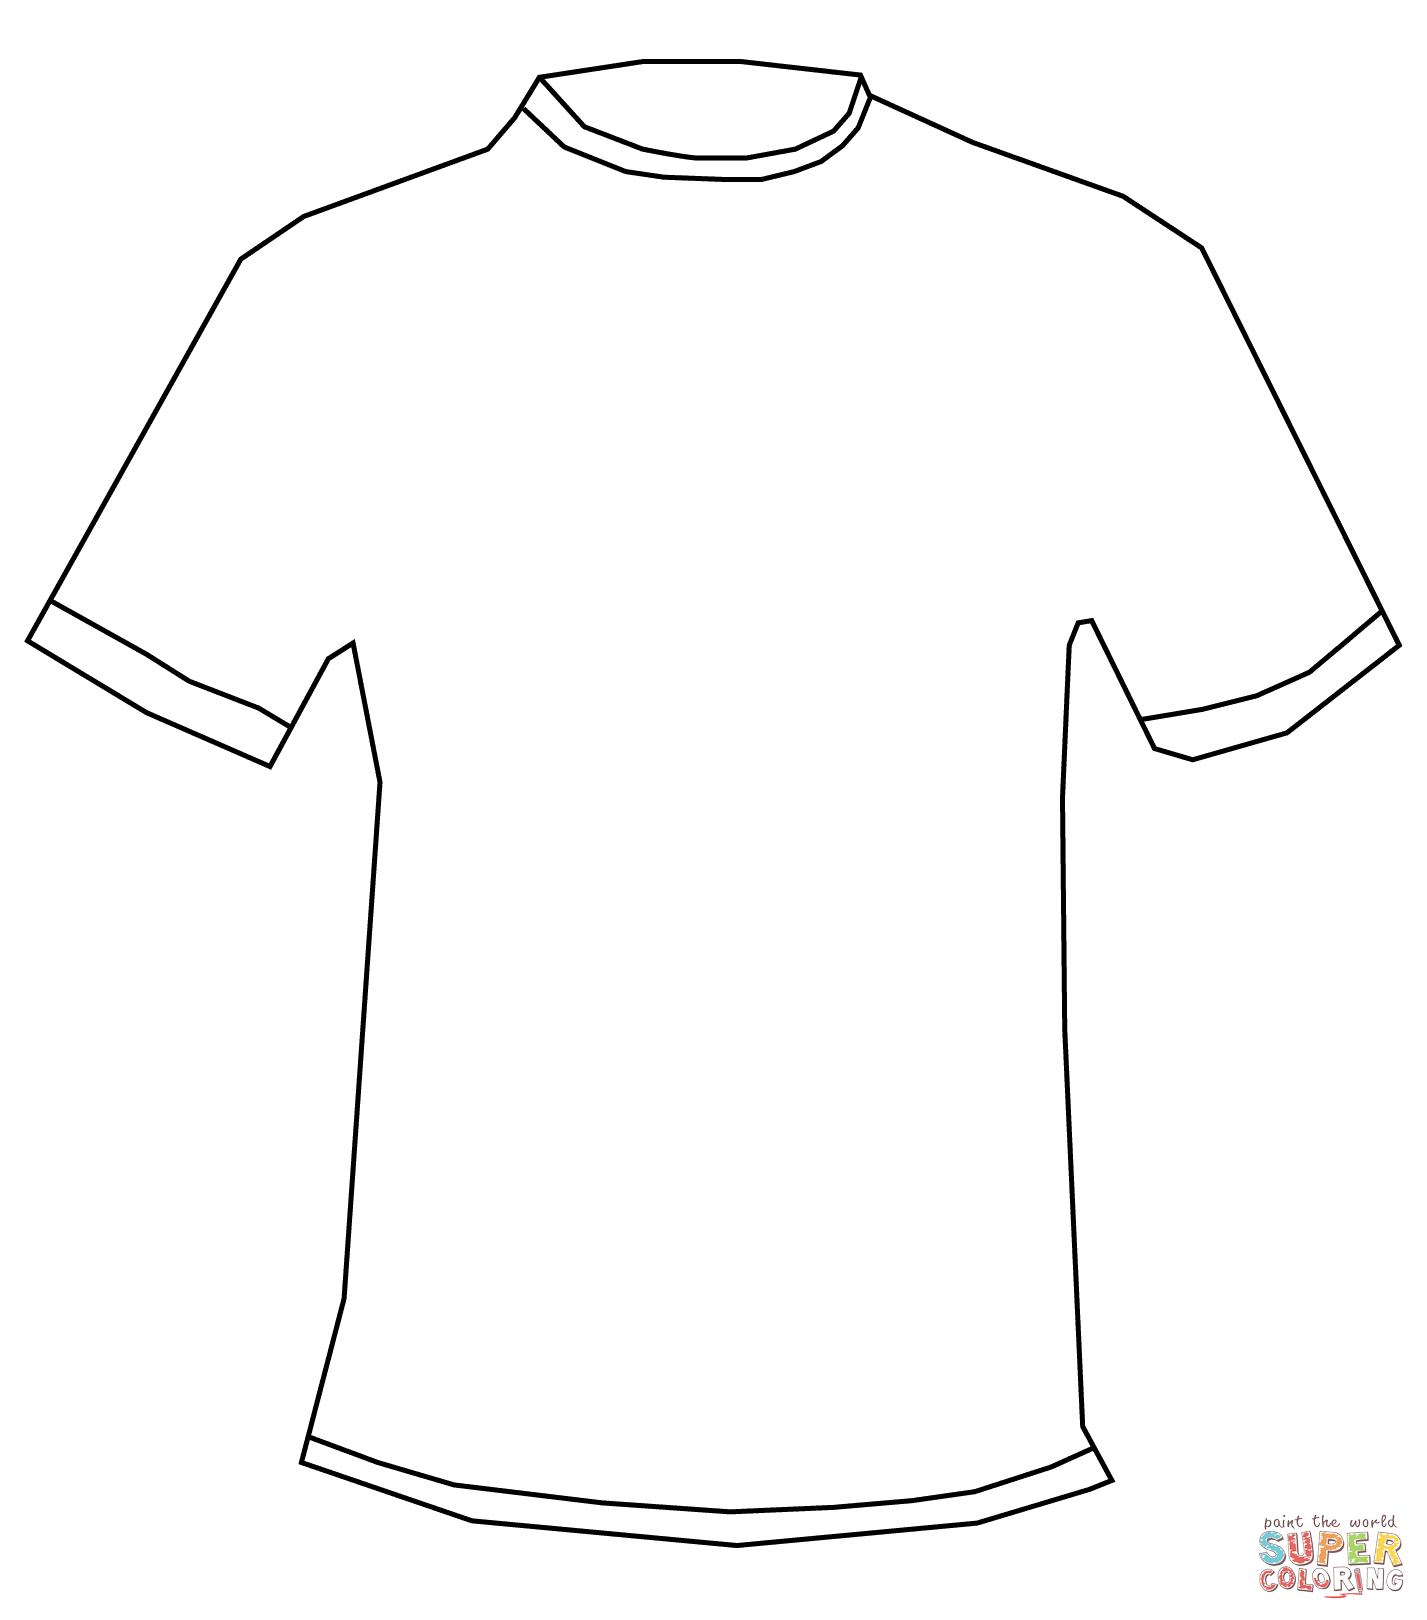 T Shirt Coloring Page | Free Printable Coloring Pages With Blank Tshirt ...